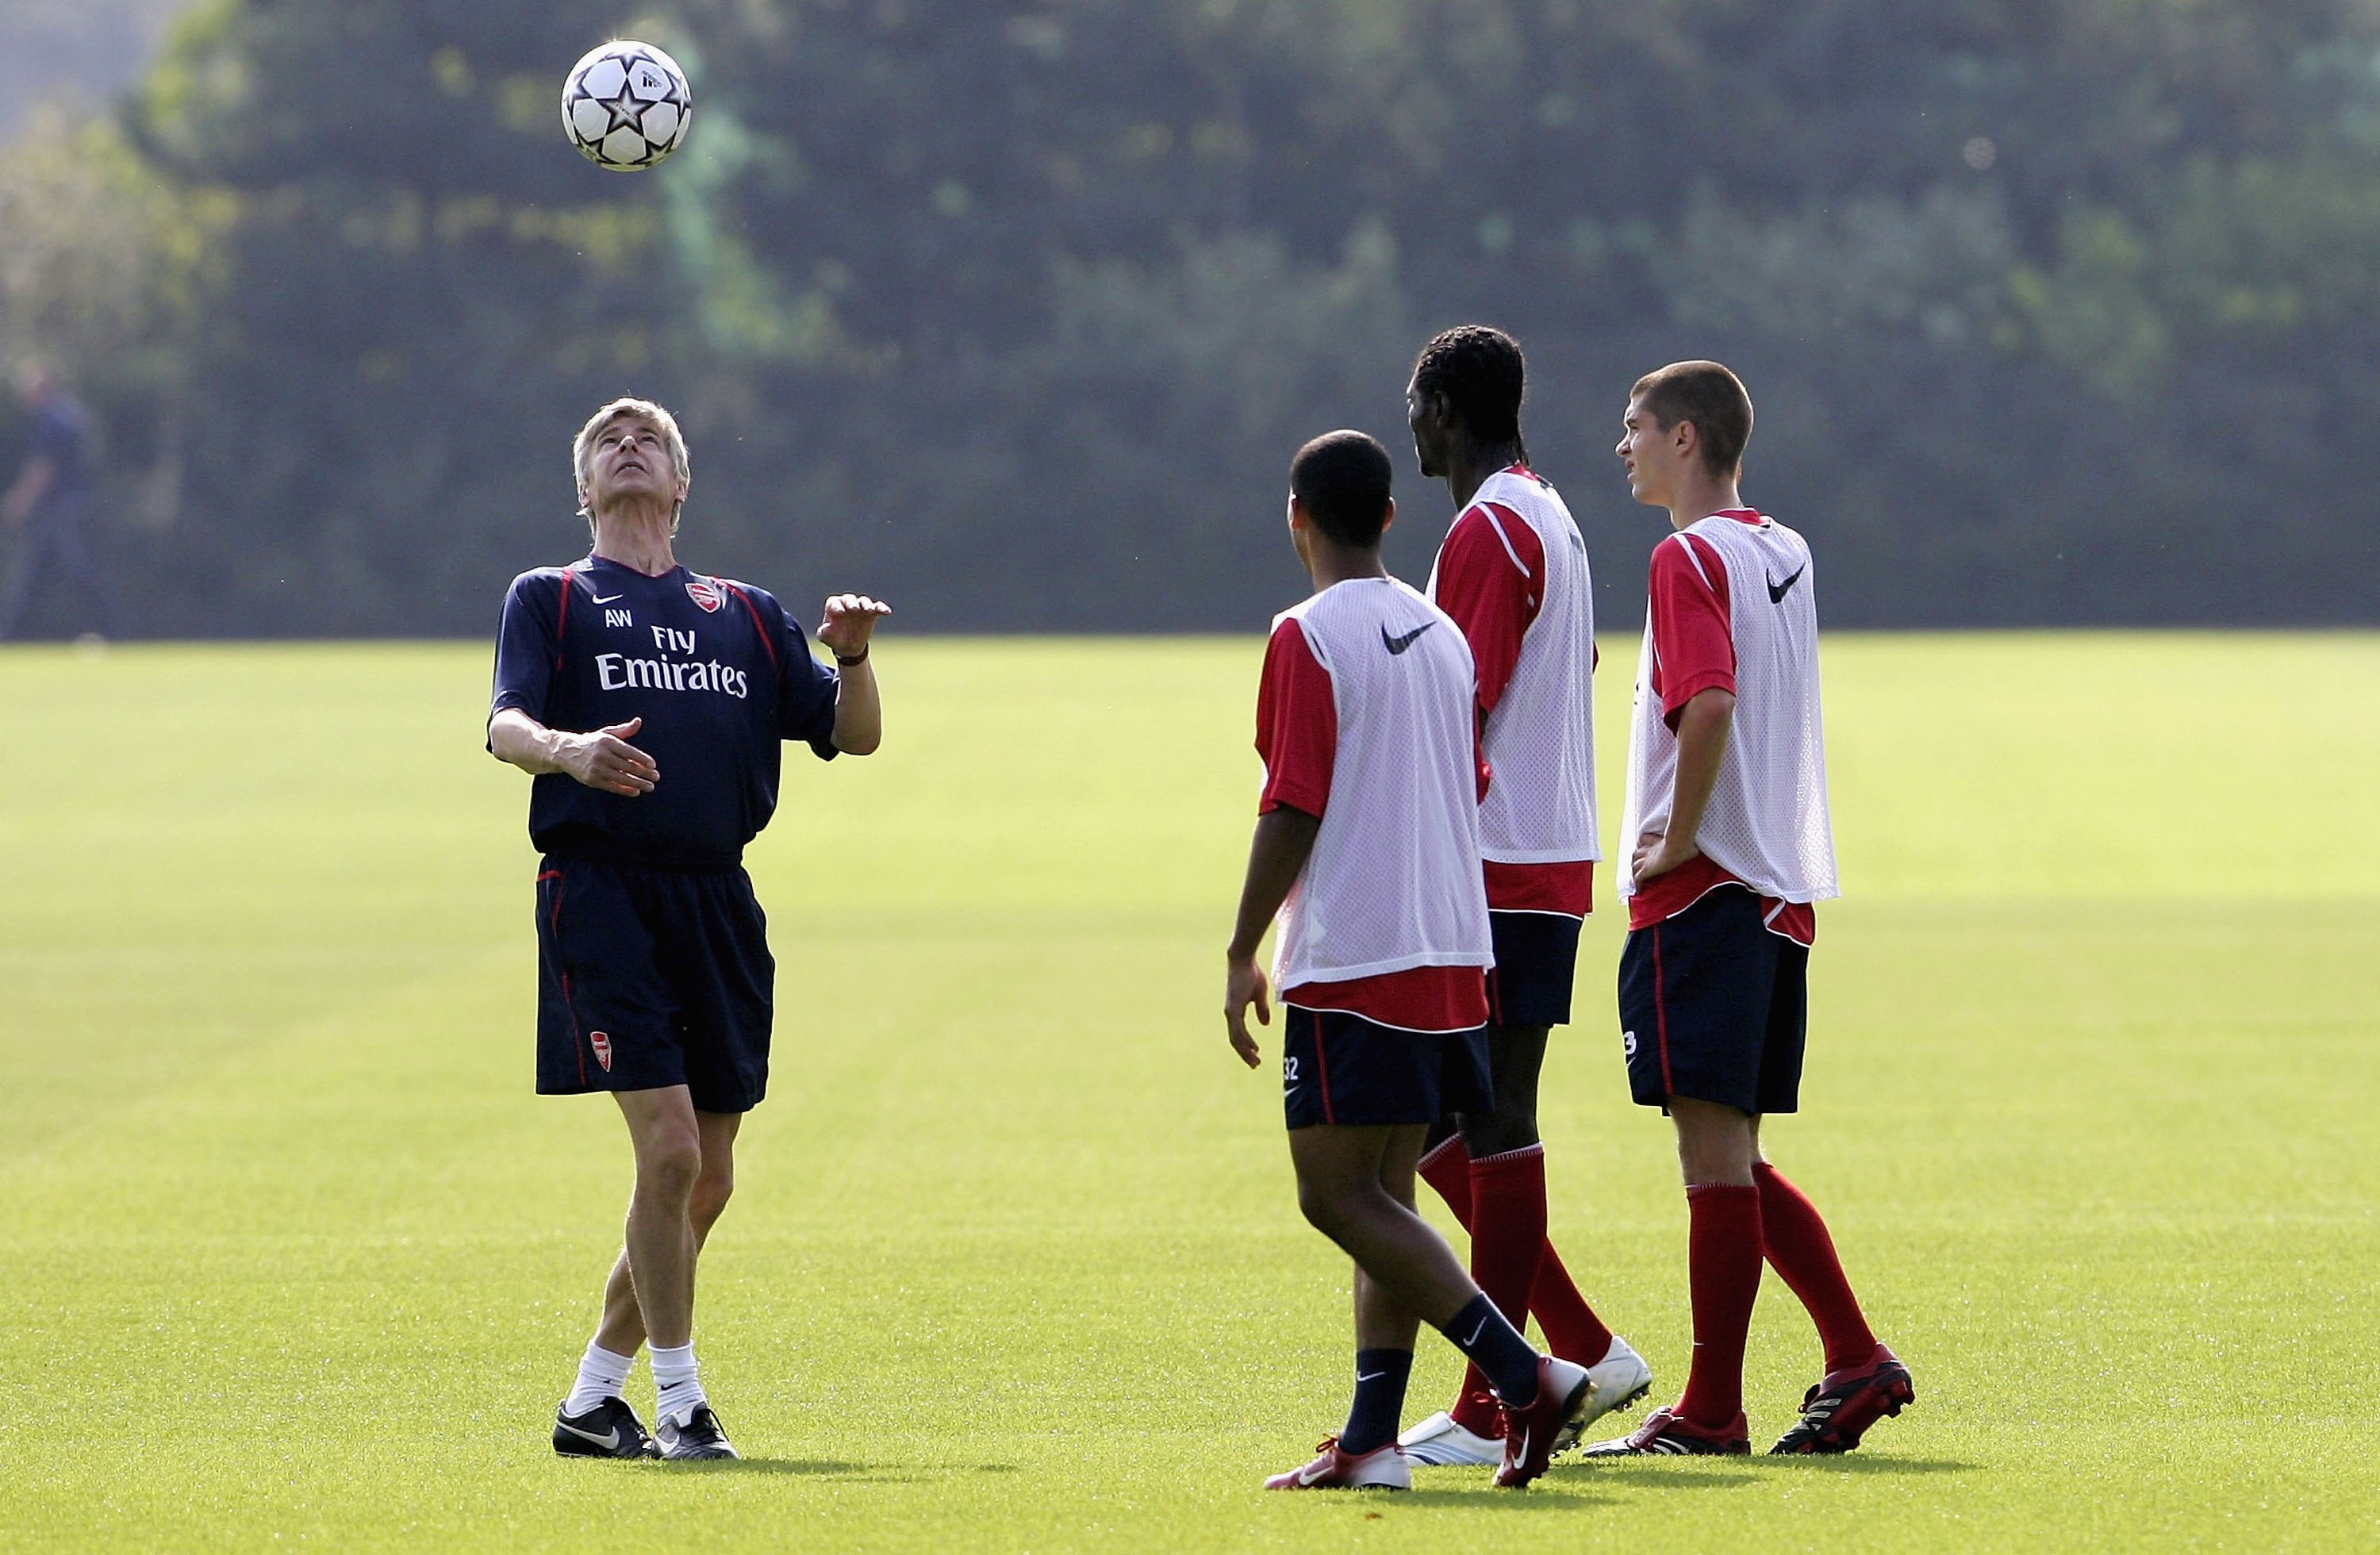 LONDON COLNEY, UNITED KINGDOM - SEPTEMBER 11:  Arsene Wenger of Arsenal gives a heading lesson to his players during an Arsenal training session at the Arsenal training ground on September 11, 2006 in London Colney, England.  (Photo by Jamie McDonald/Gett